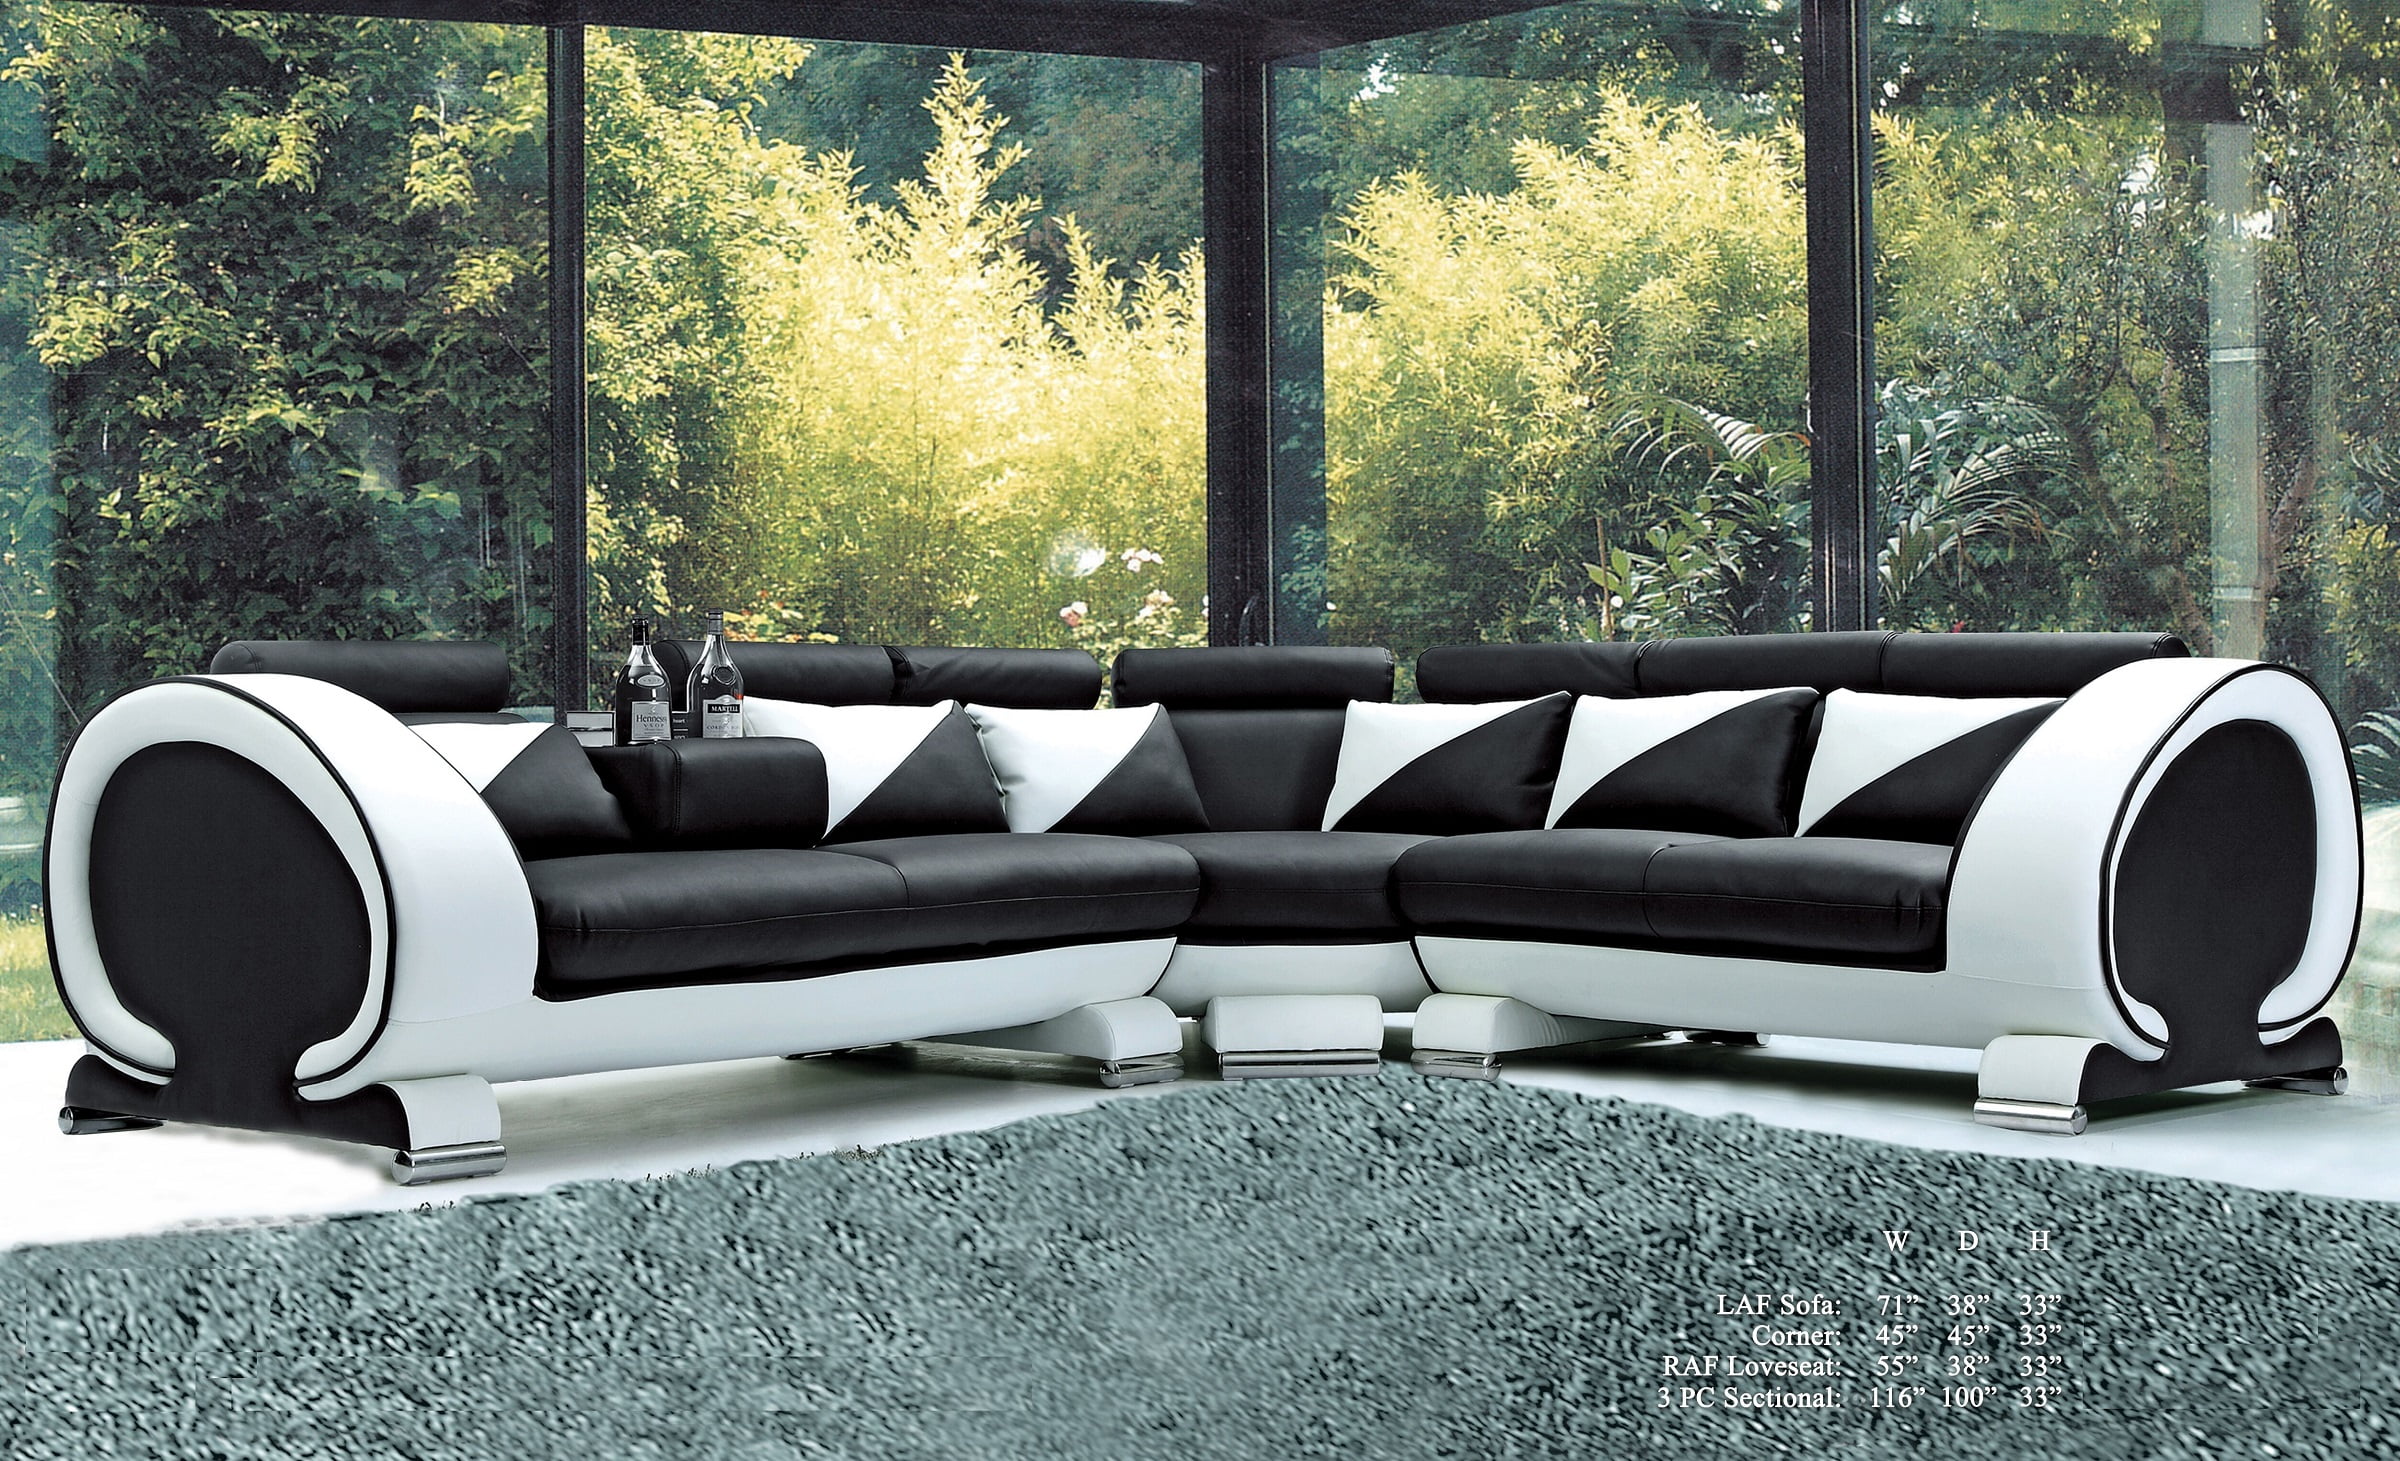 Classic Contemporary White And Black Bonded Leather Sectional Sofa Set ...